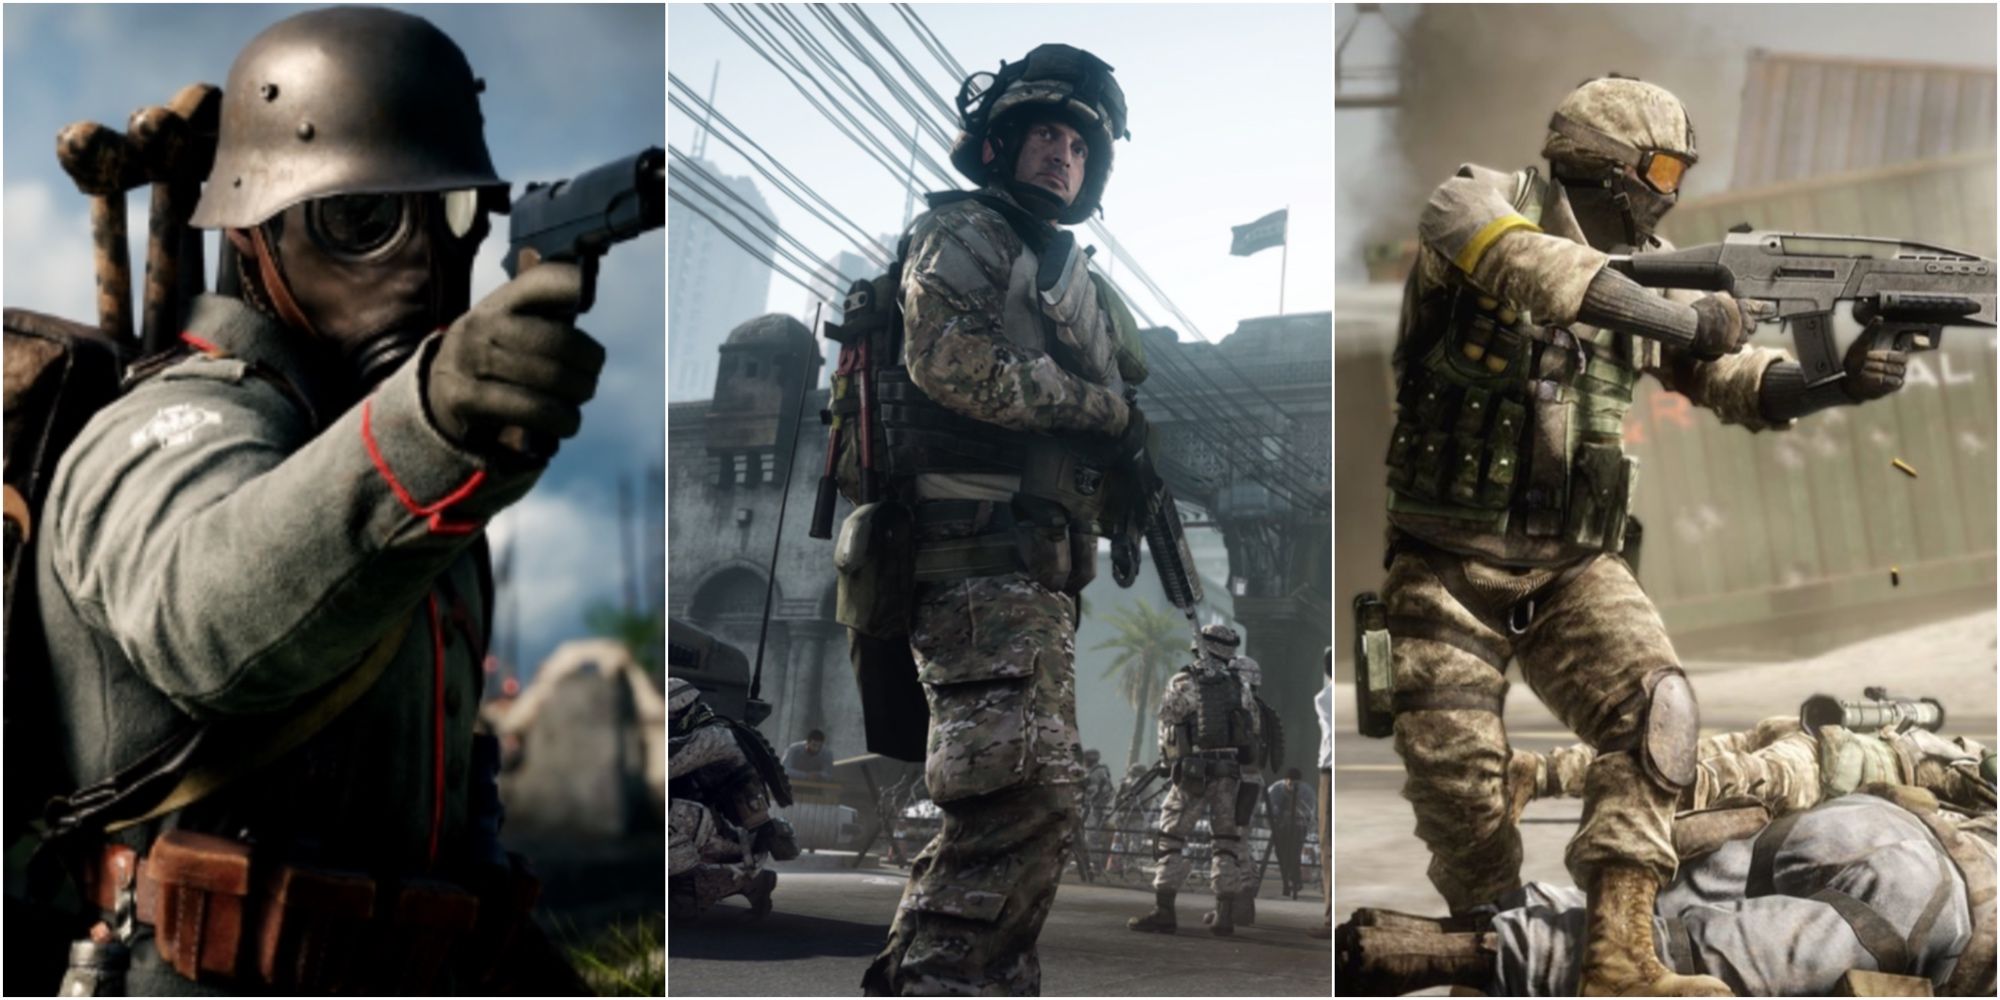 Soldiers from Battlefield 1, Battlefield 3, and battlefield Bad Company 2